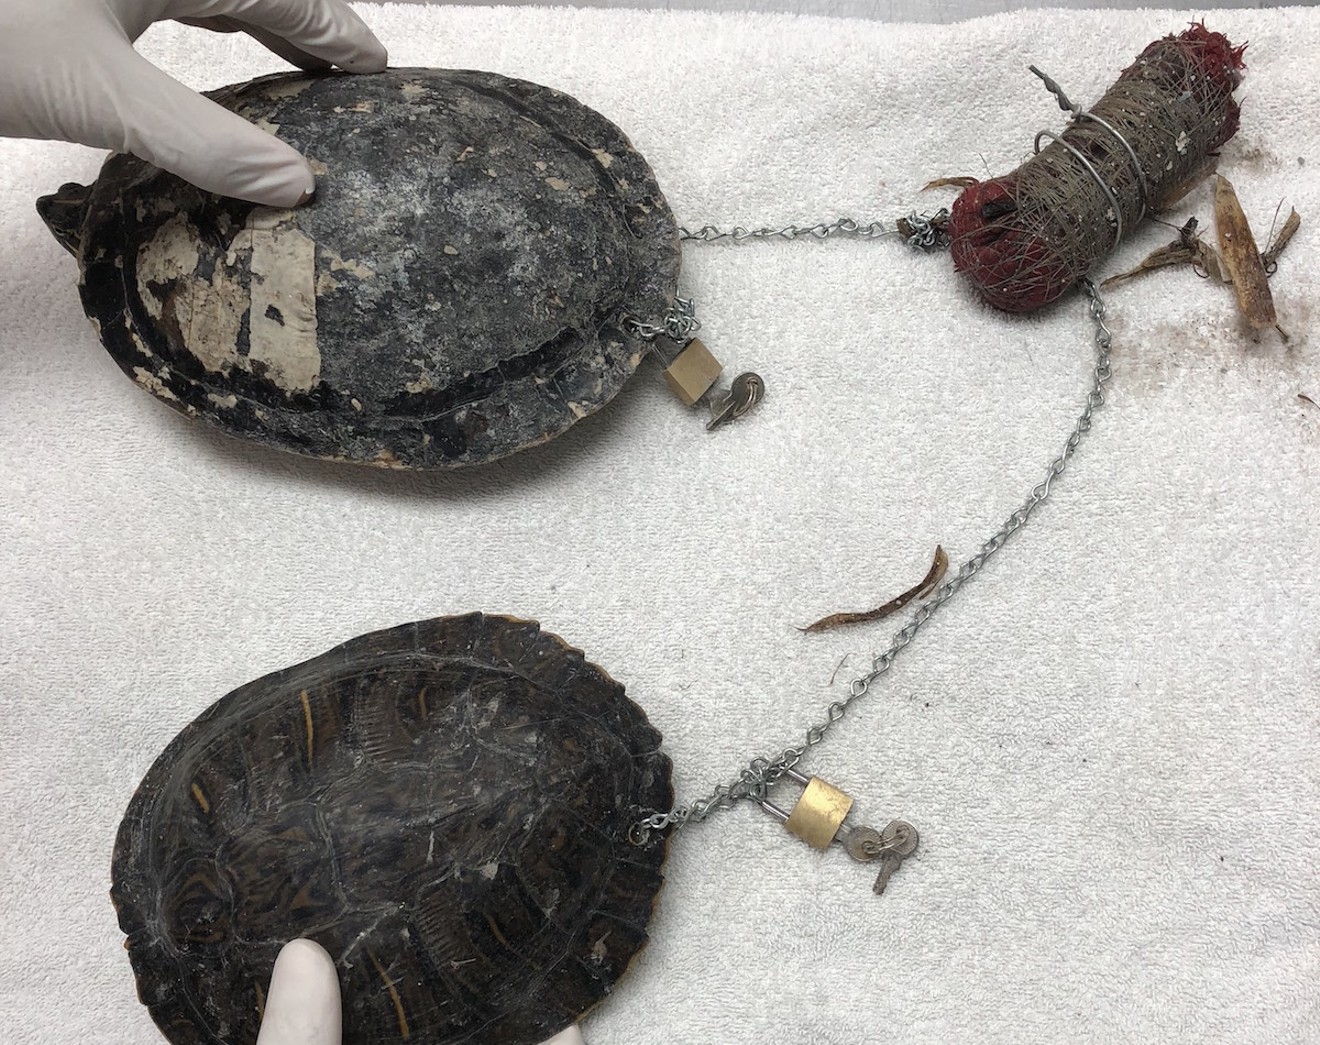 The turtles had shell rot and respiratory infections.